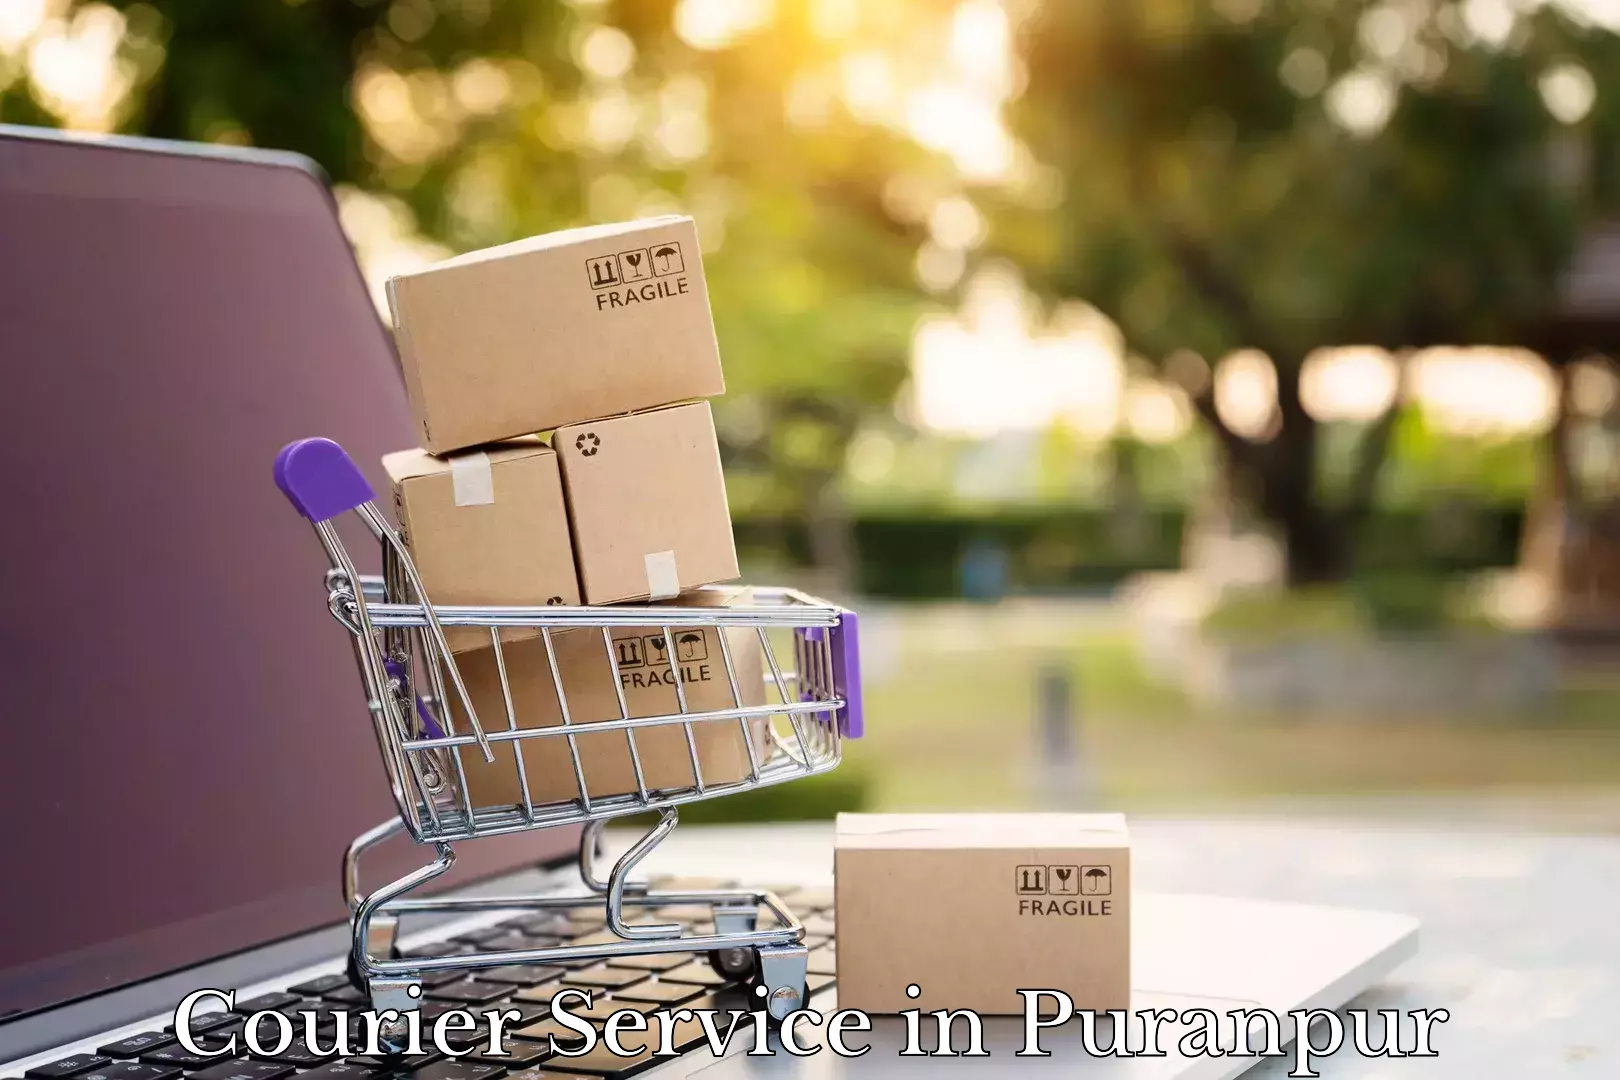 Affordable parcel service in Puranpur